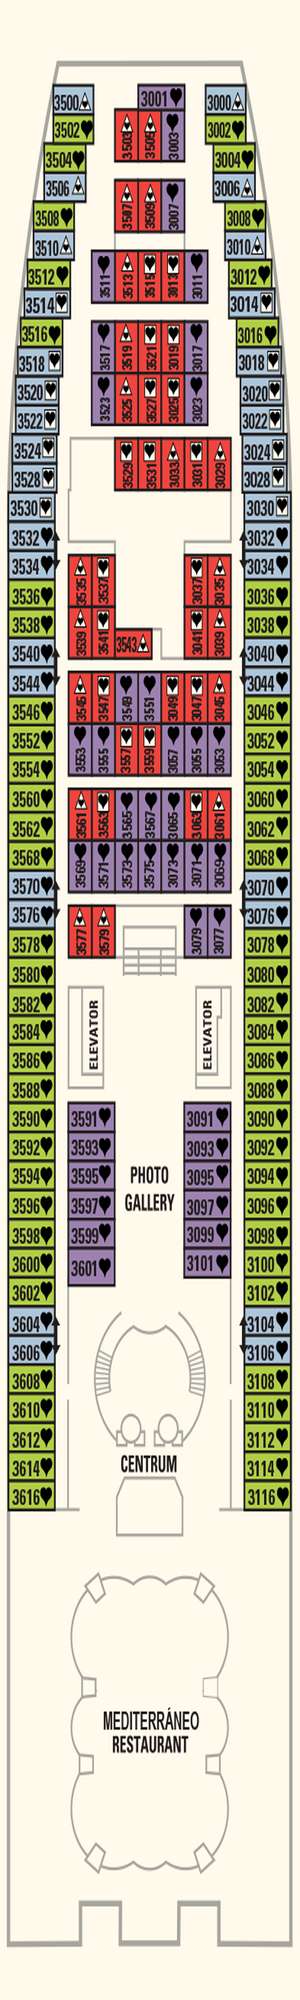 Deck plan for Sovereign